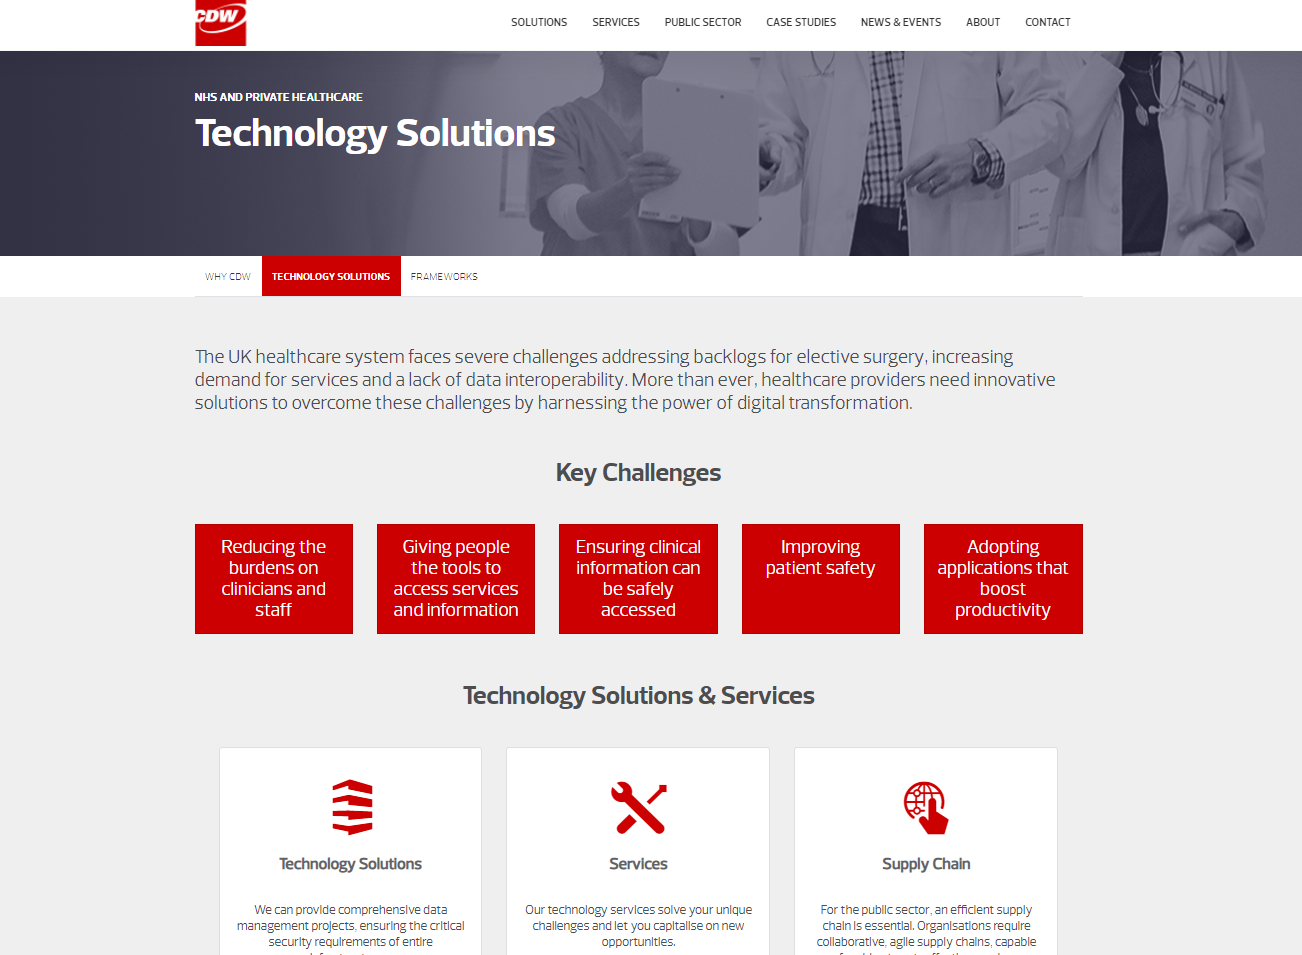 CDW web content - healthcare technology webpage content